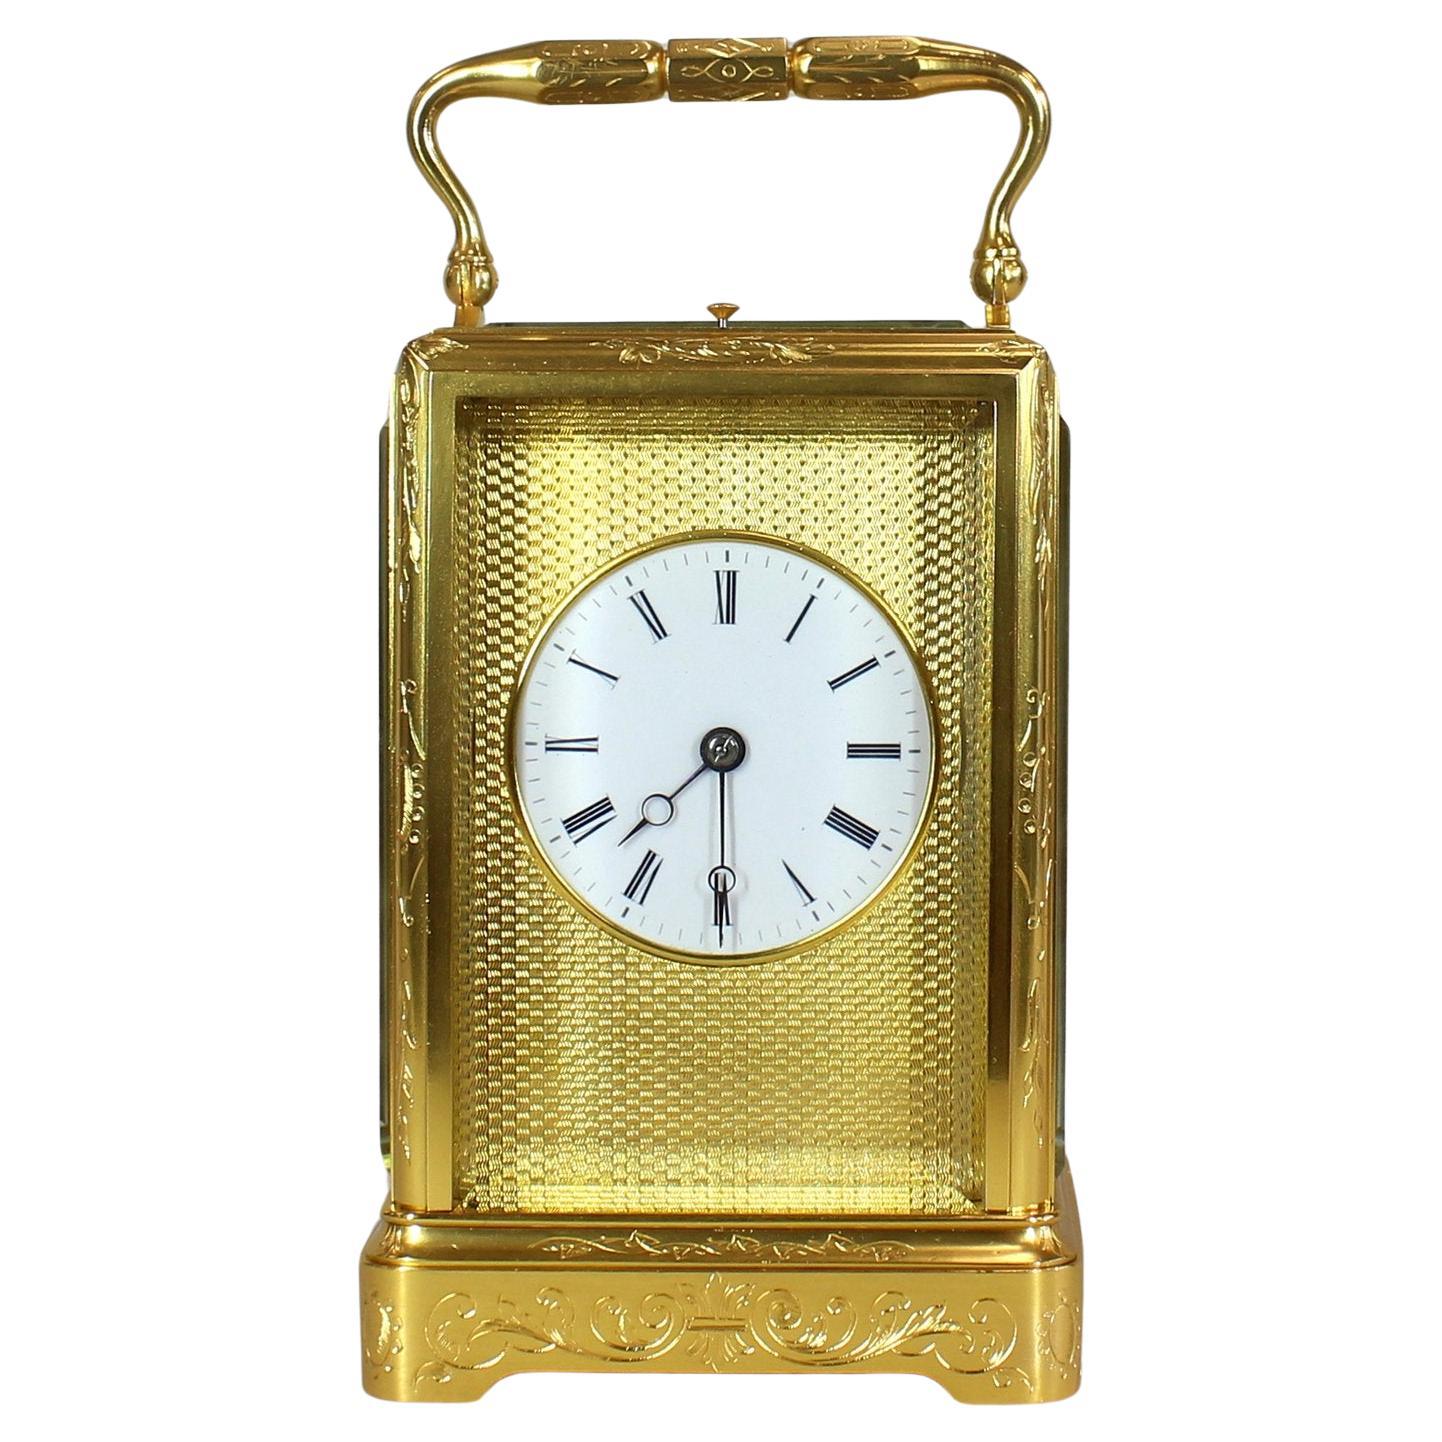 One Piece Engraved Repeating Carriage Clock For Sale